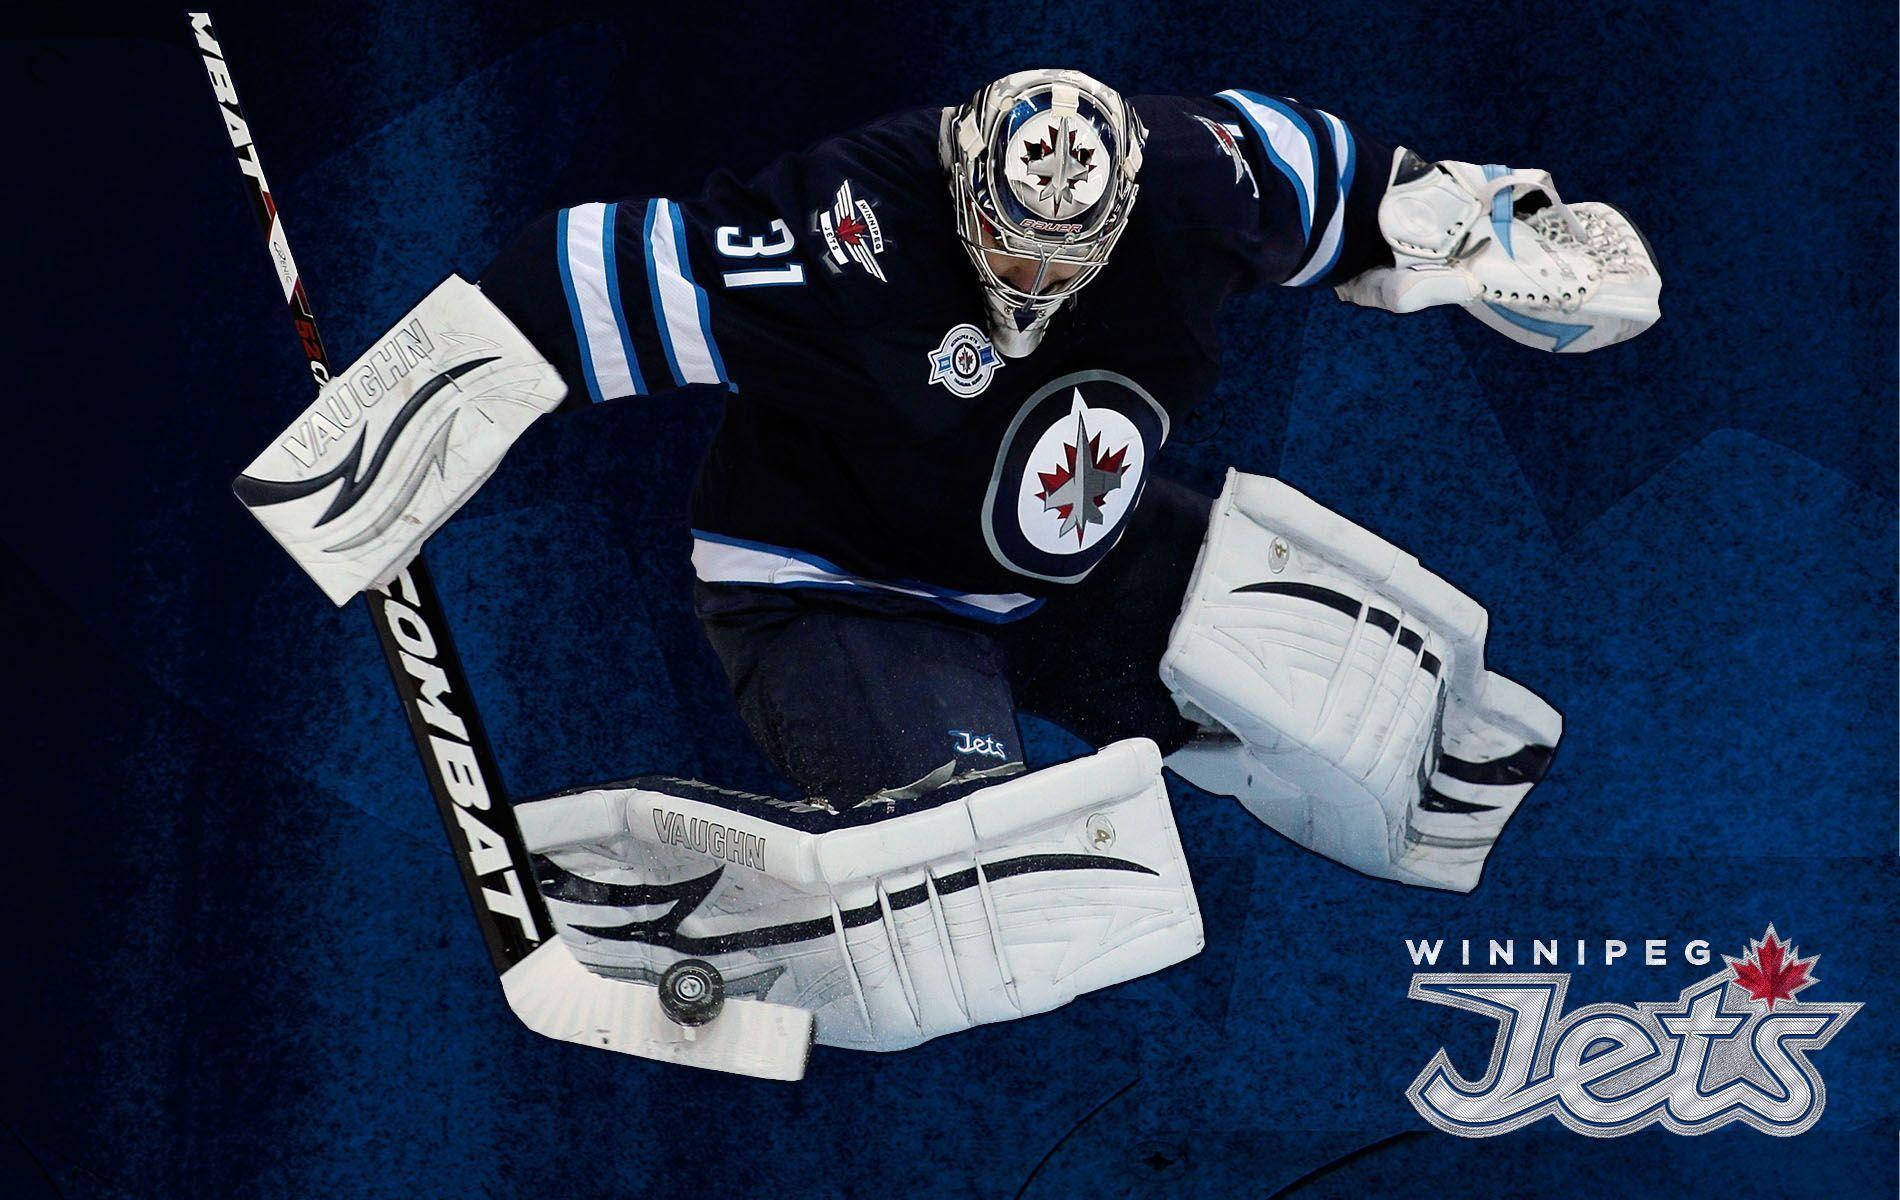 Intense Game Moment With Winnipeg Jets Player Wallpaper